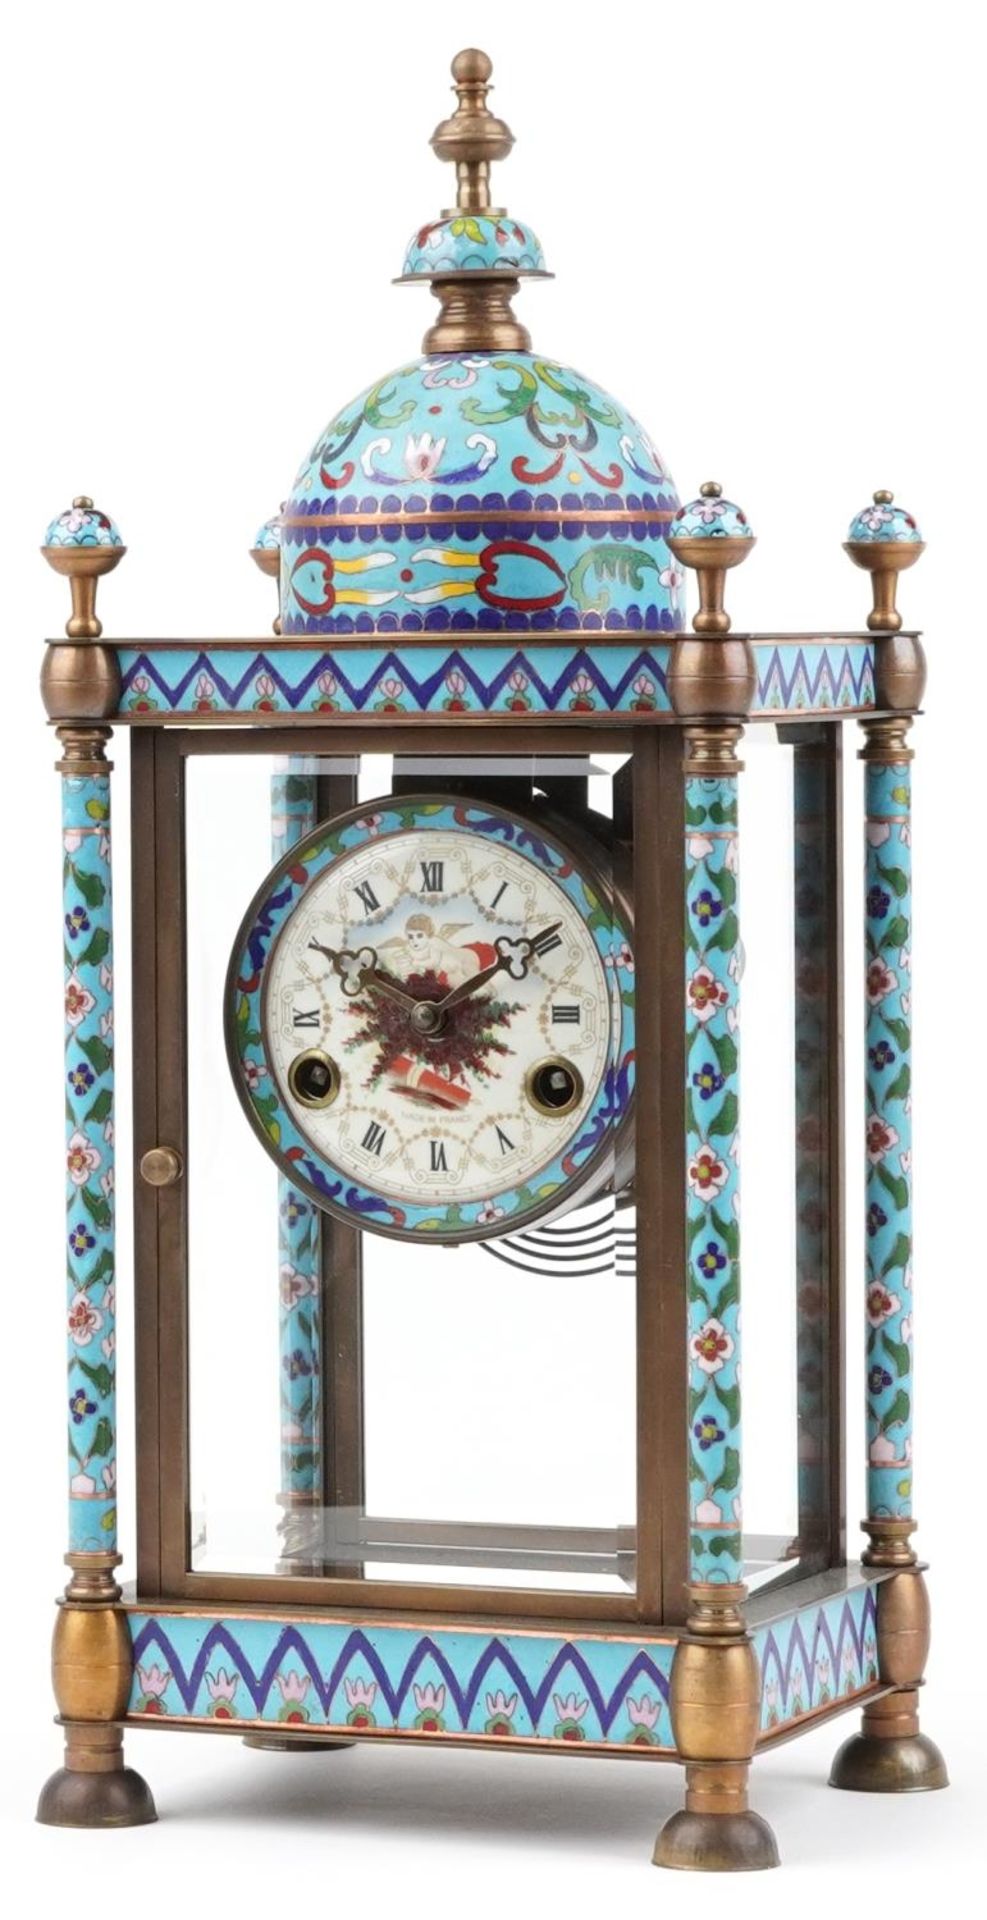 French champleve enamel and brass four glass mantle clock striking on a gong, the enamelled dial